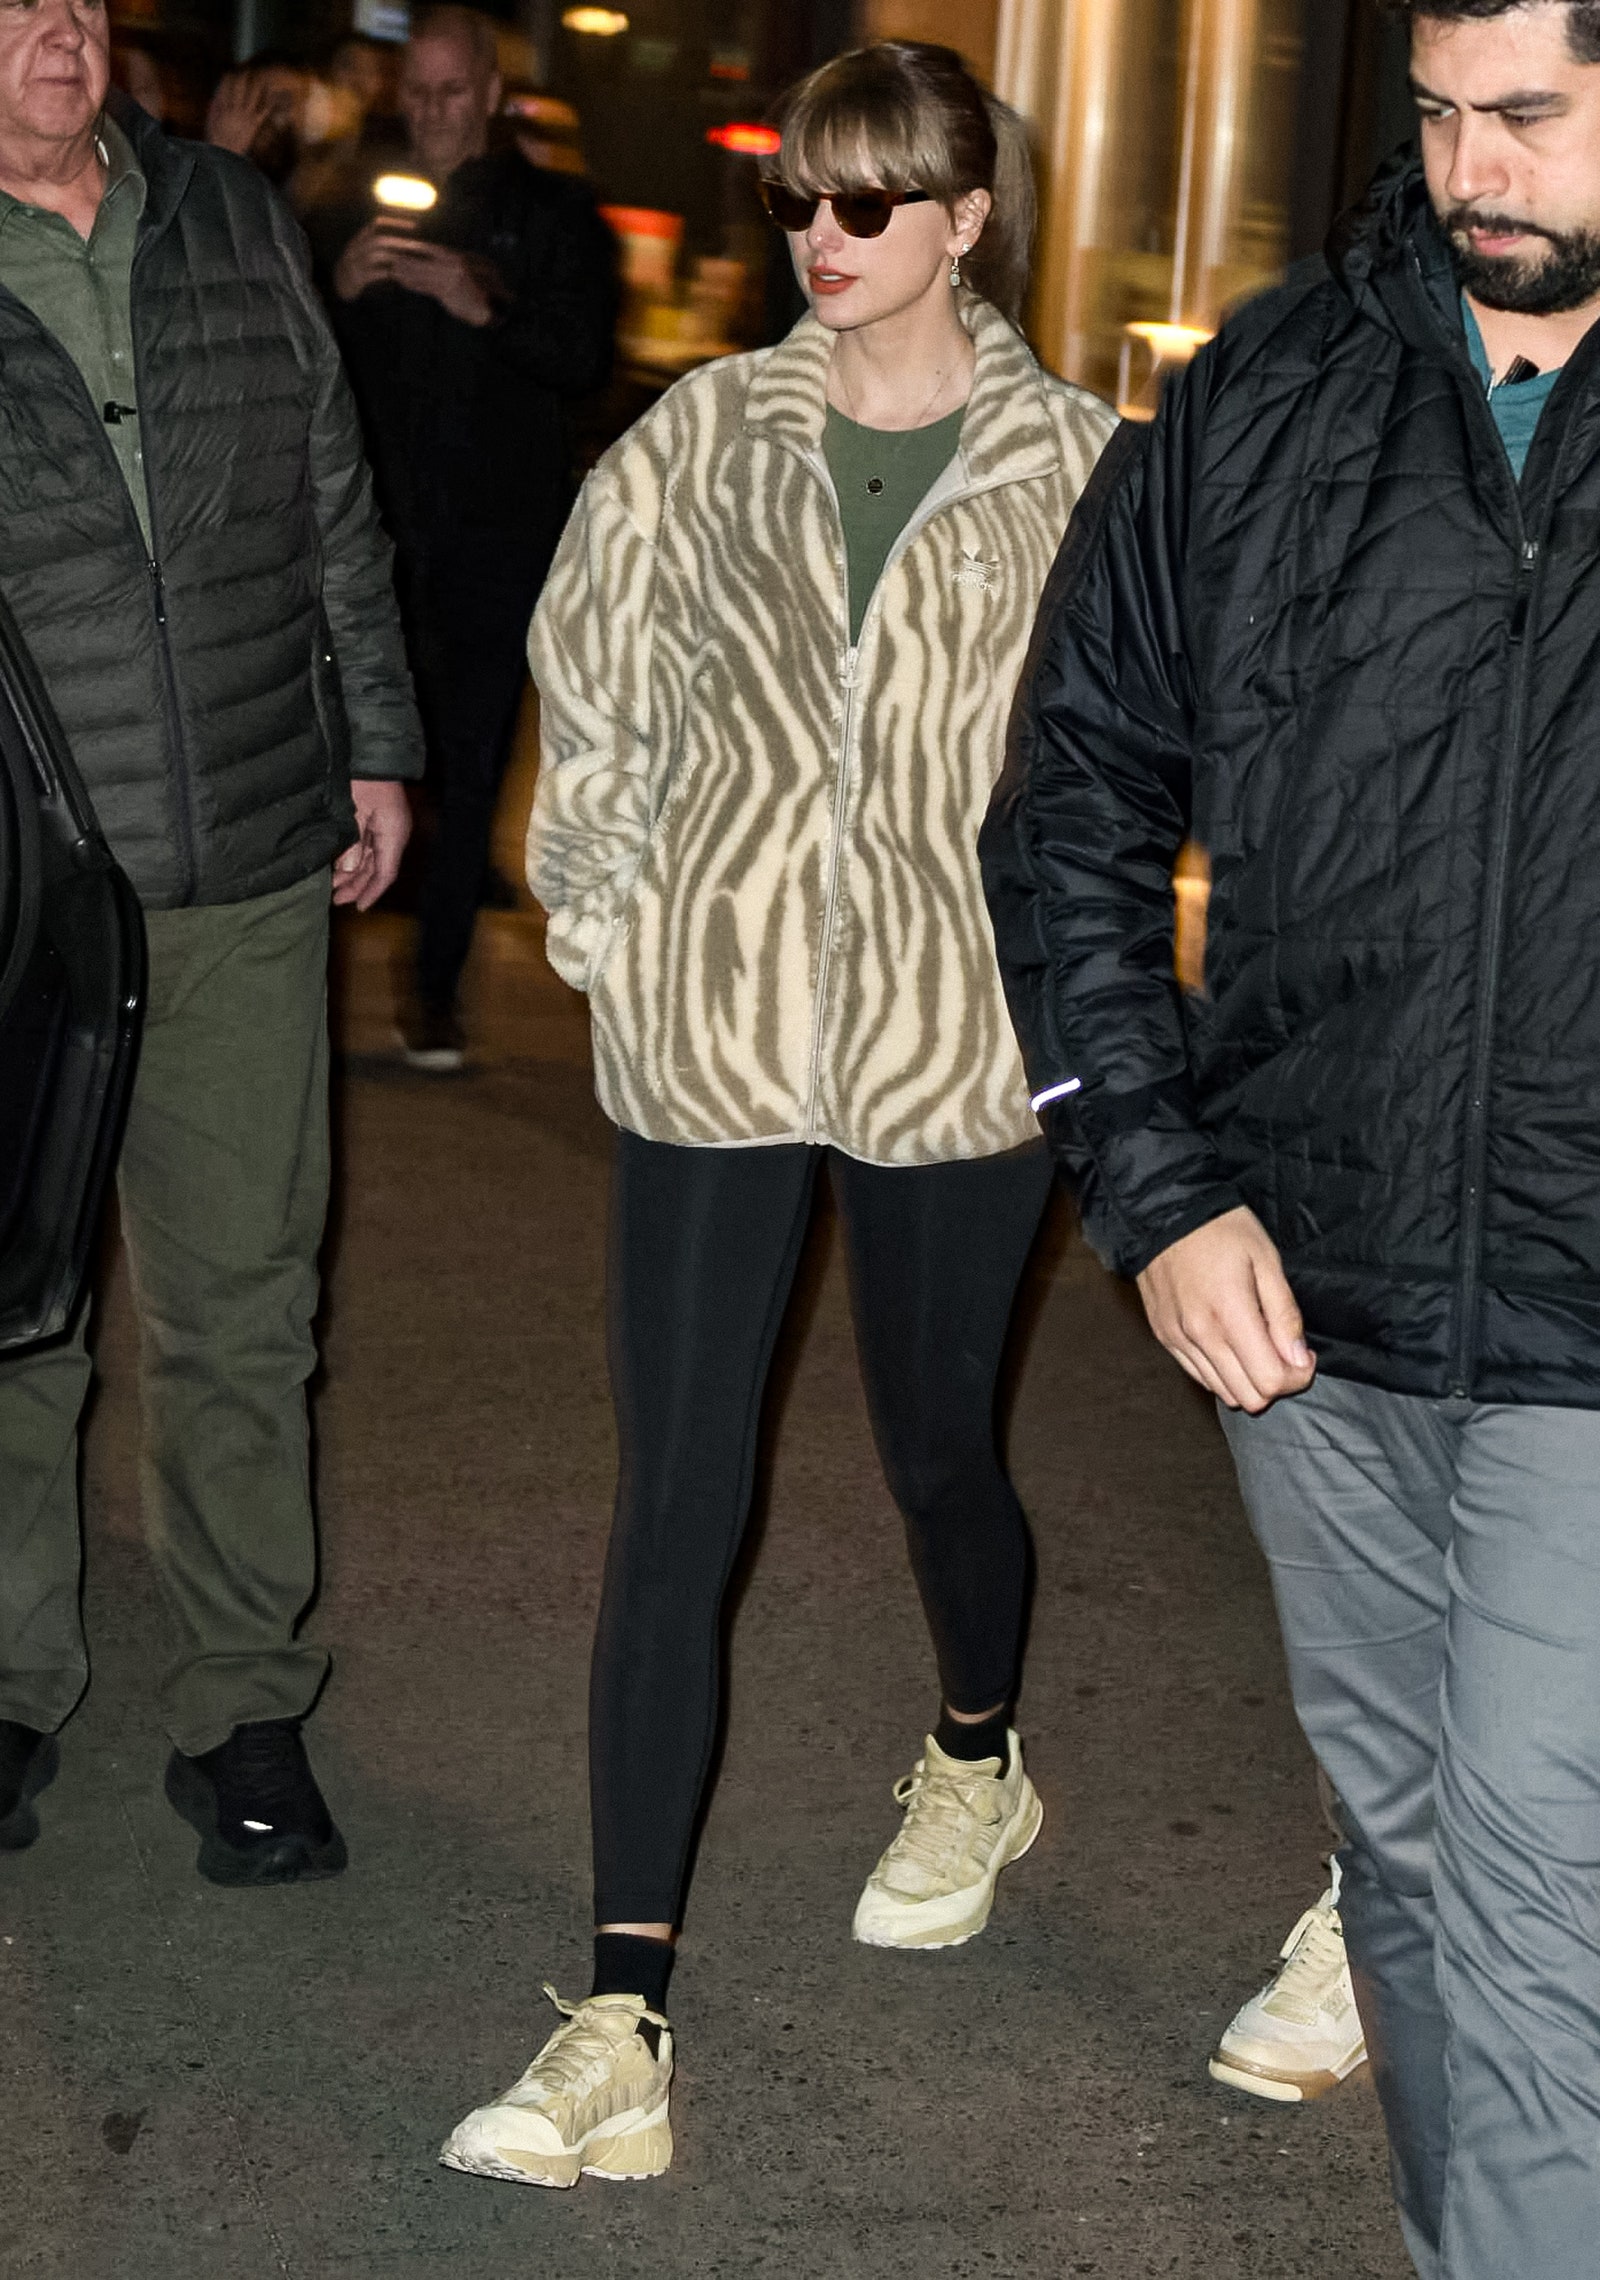 Taylor Swift Dressed Like a Zebra For Her Latest Studio Session